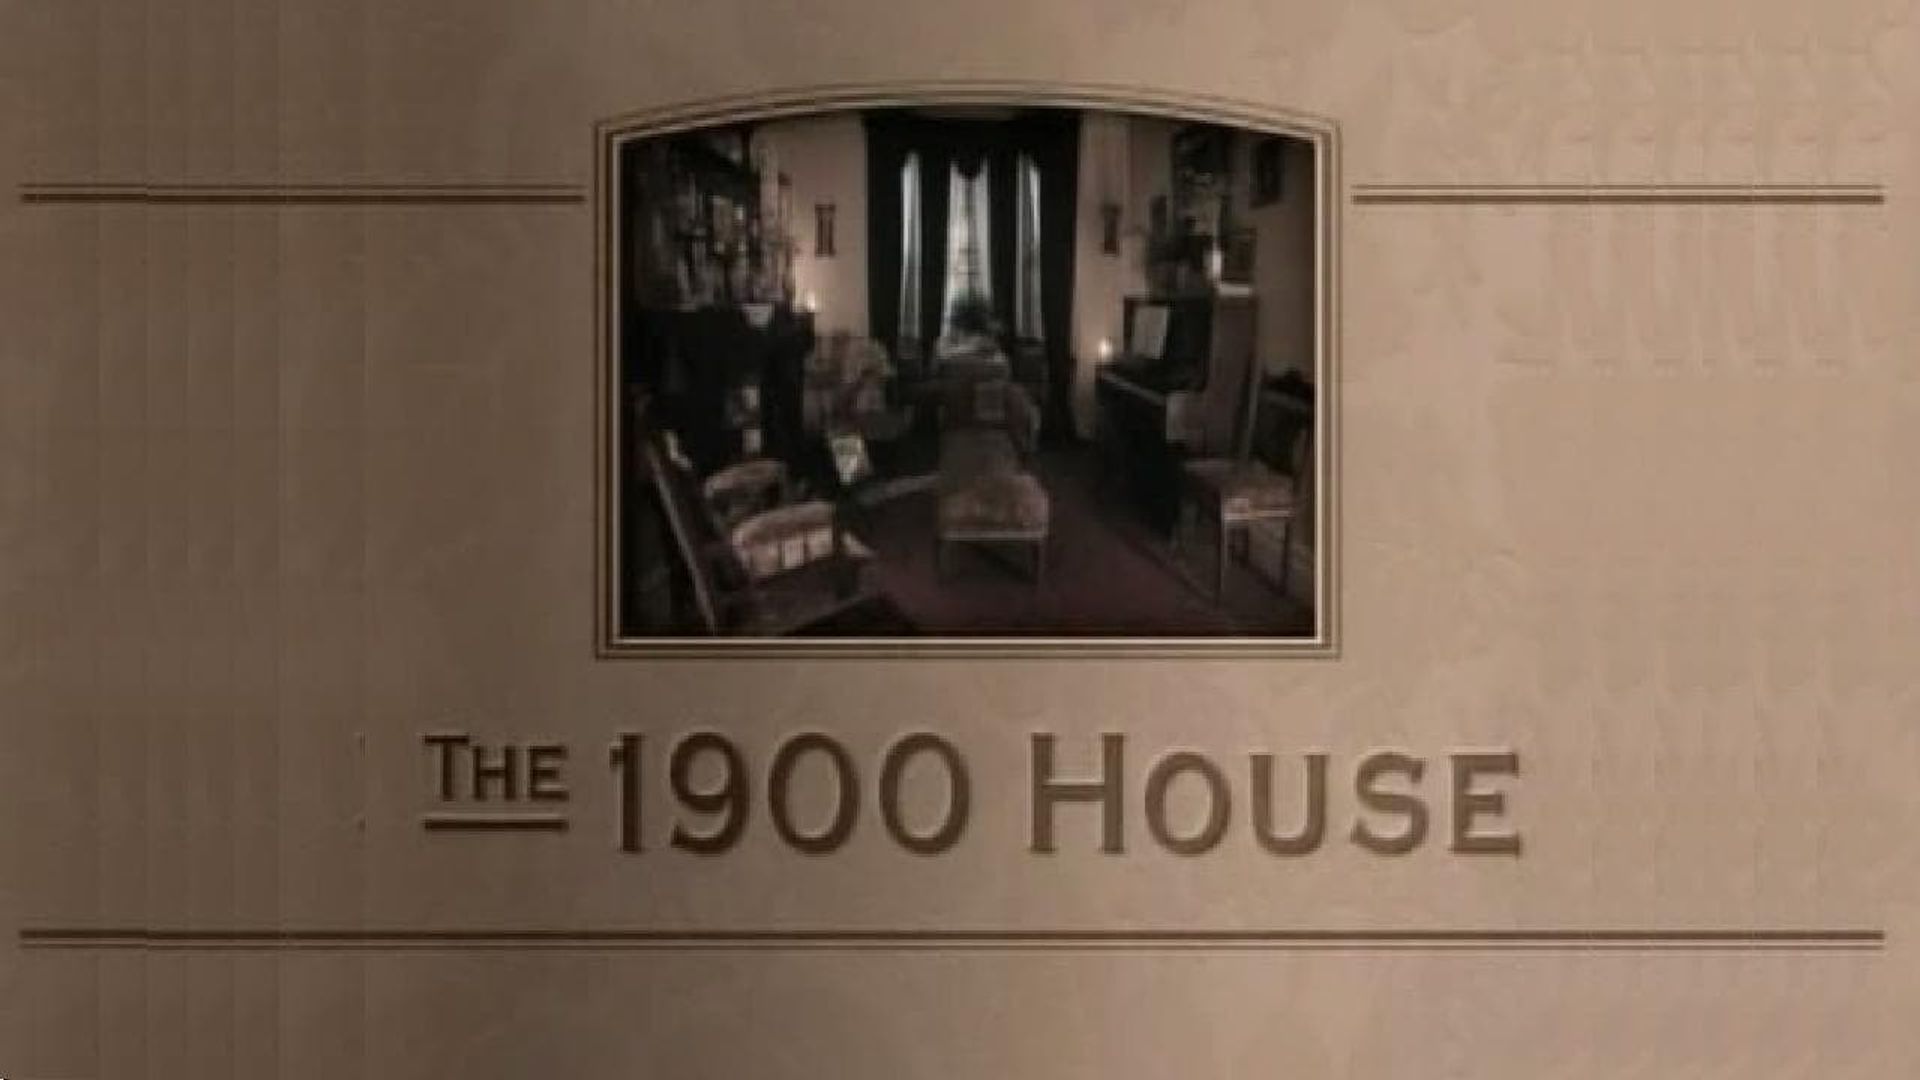 The 1900 House background